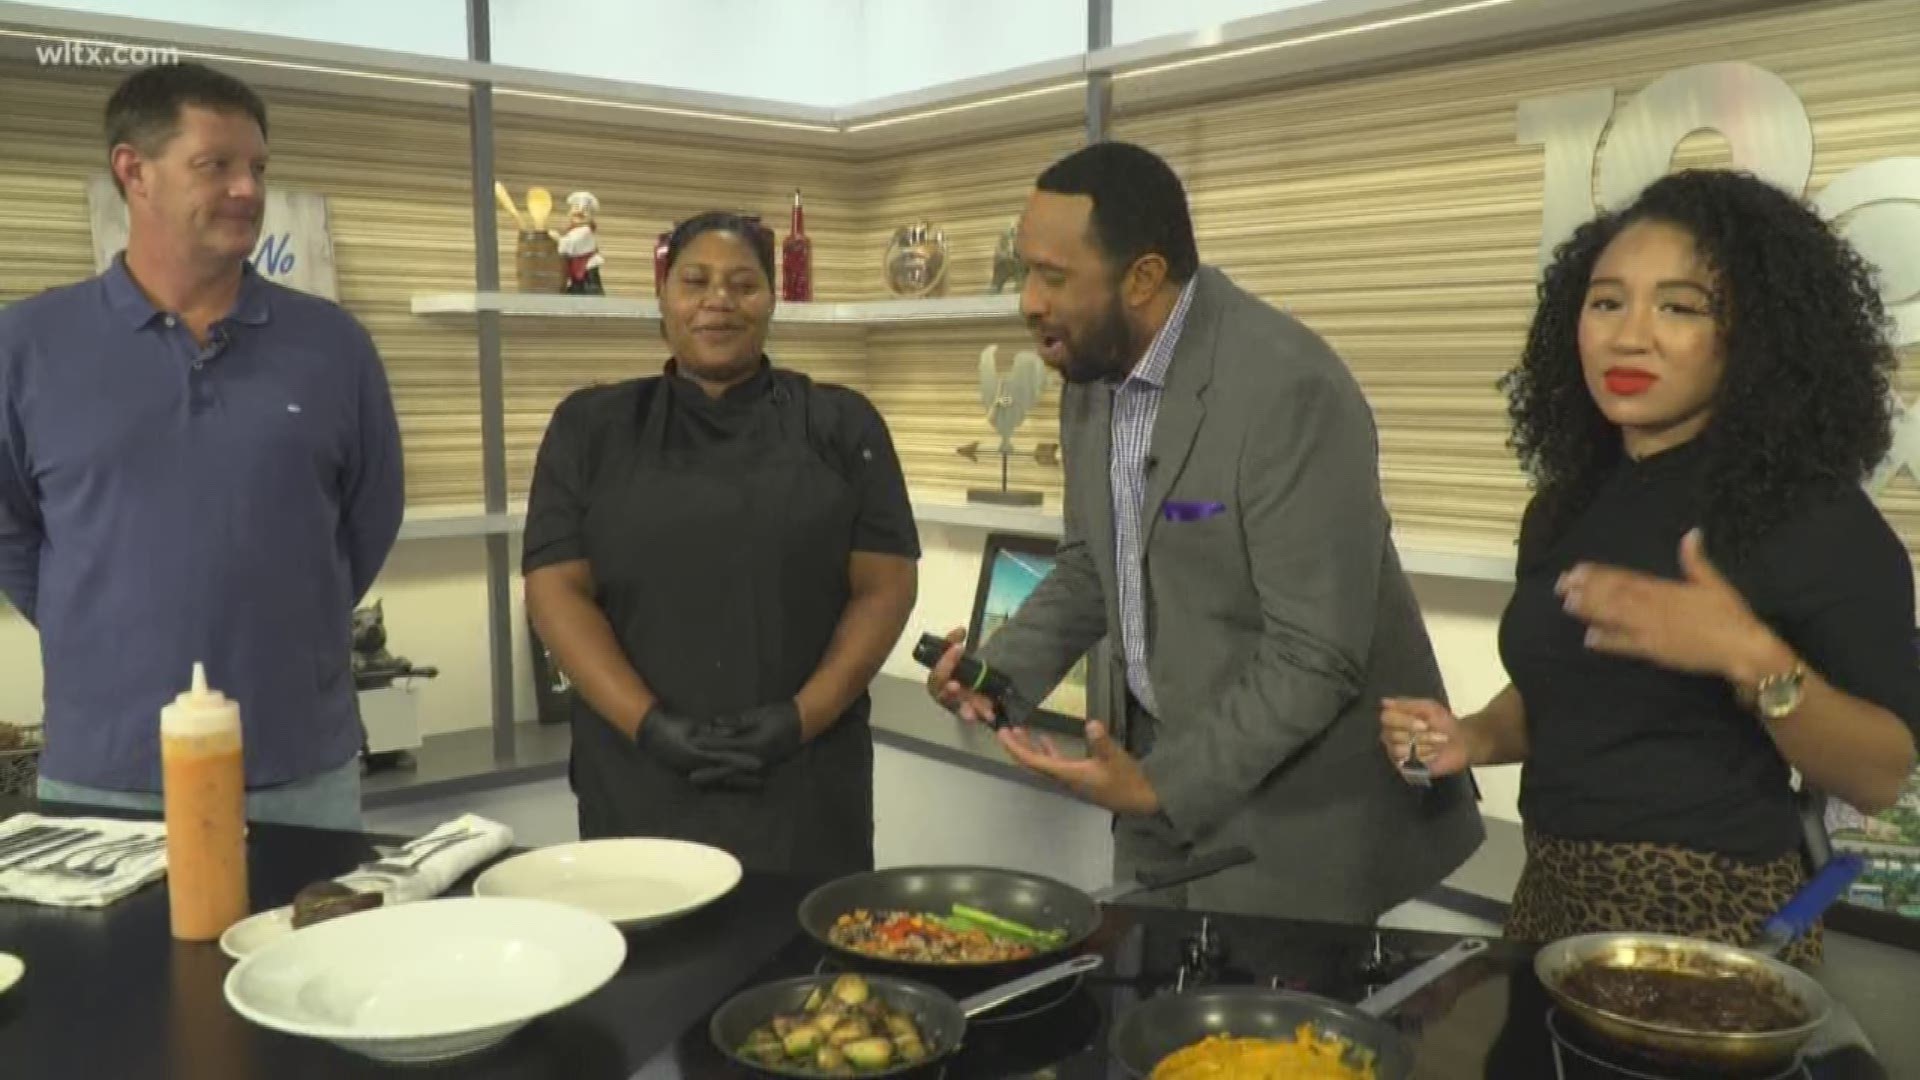 BLD Diner visited the News 19 studio to showcase dishes for Restaurant Week